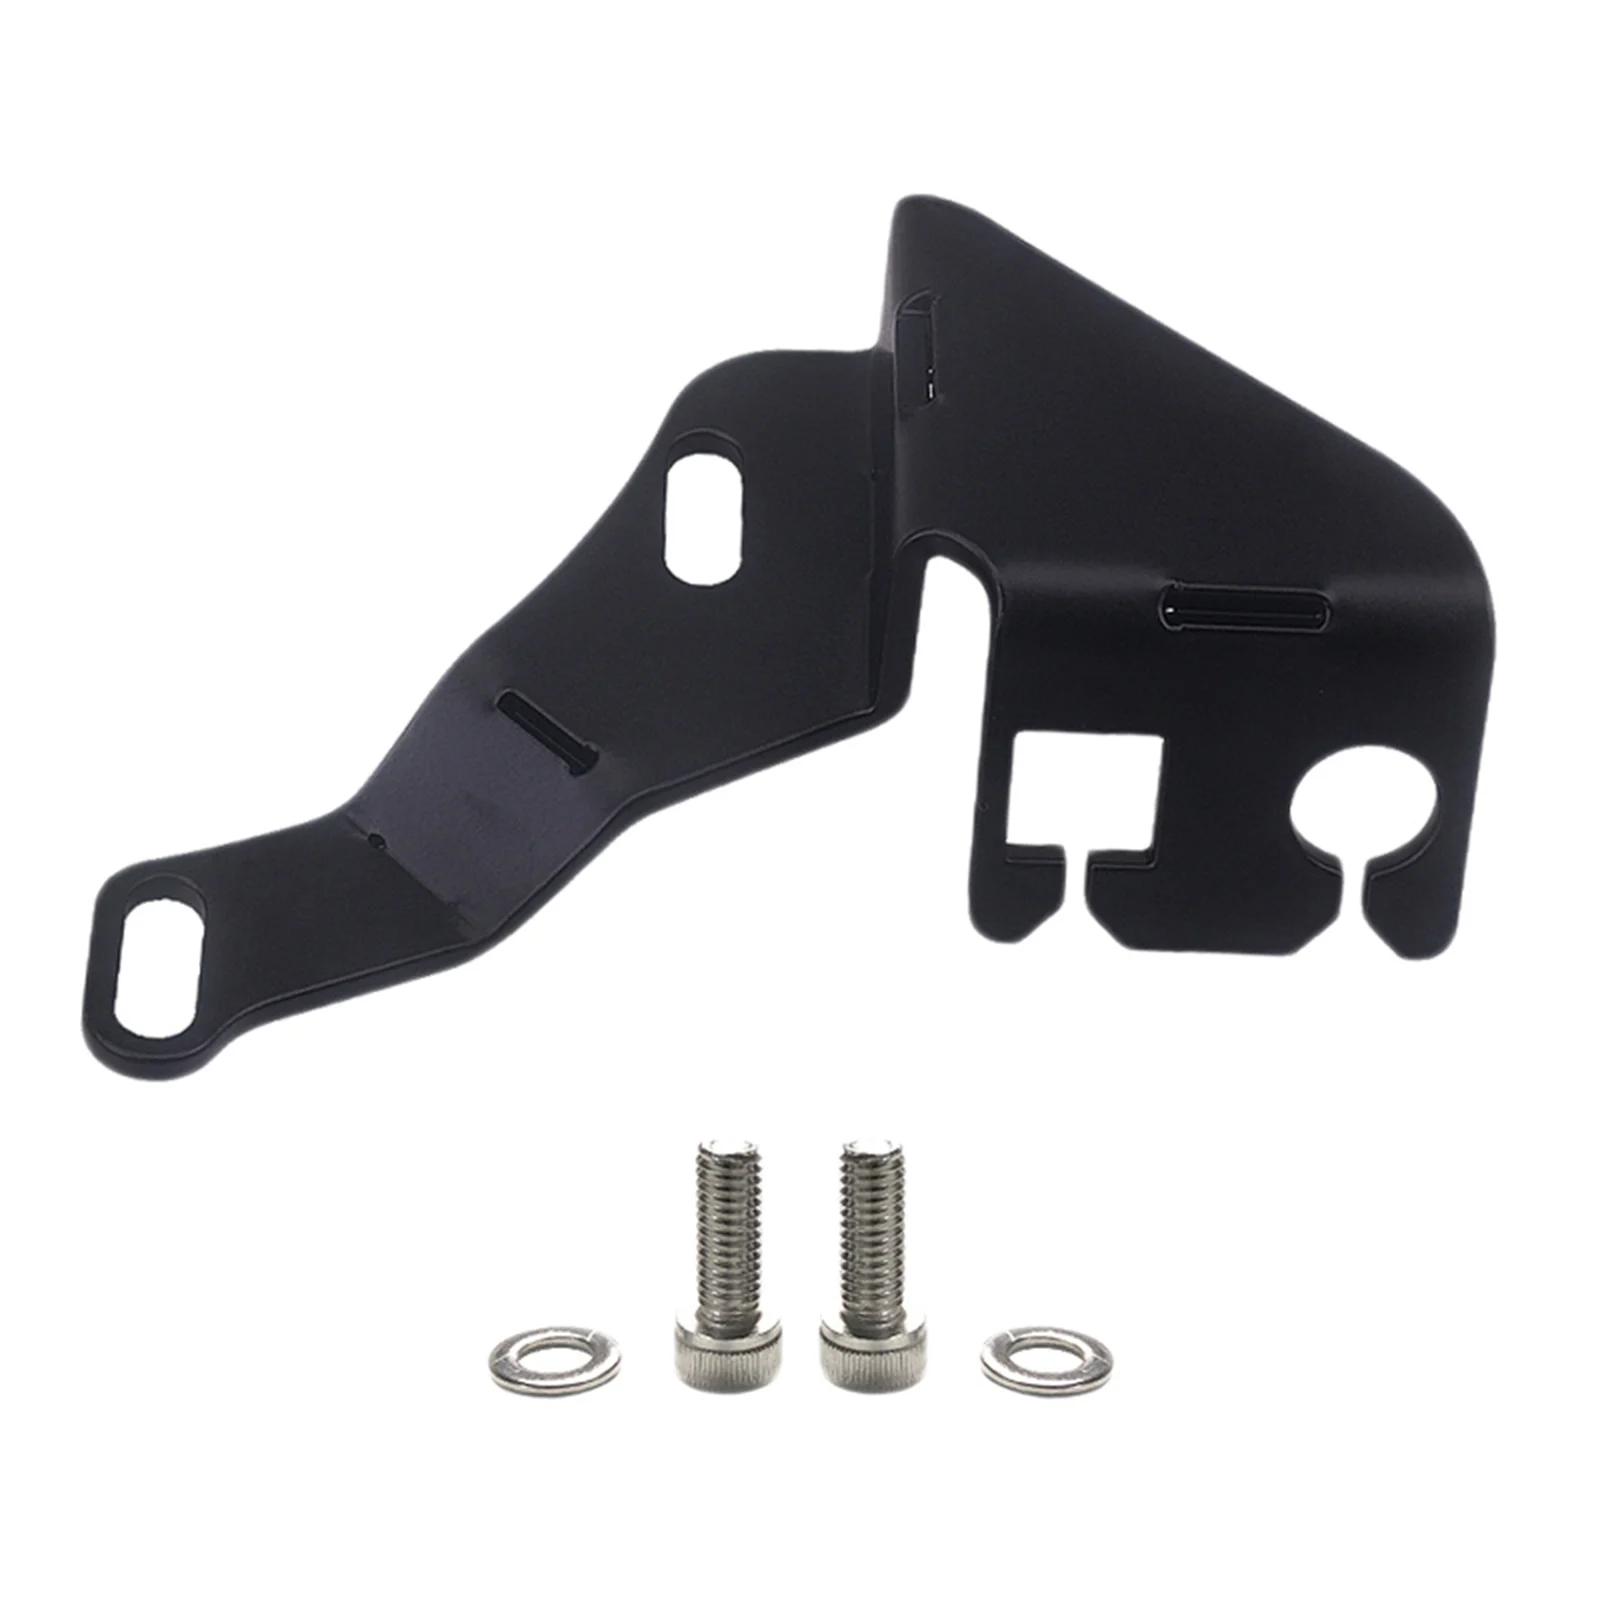 L92 Adjustable Throttle Cable Bracket Kit with Hardwares for GMT800 Truck